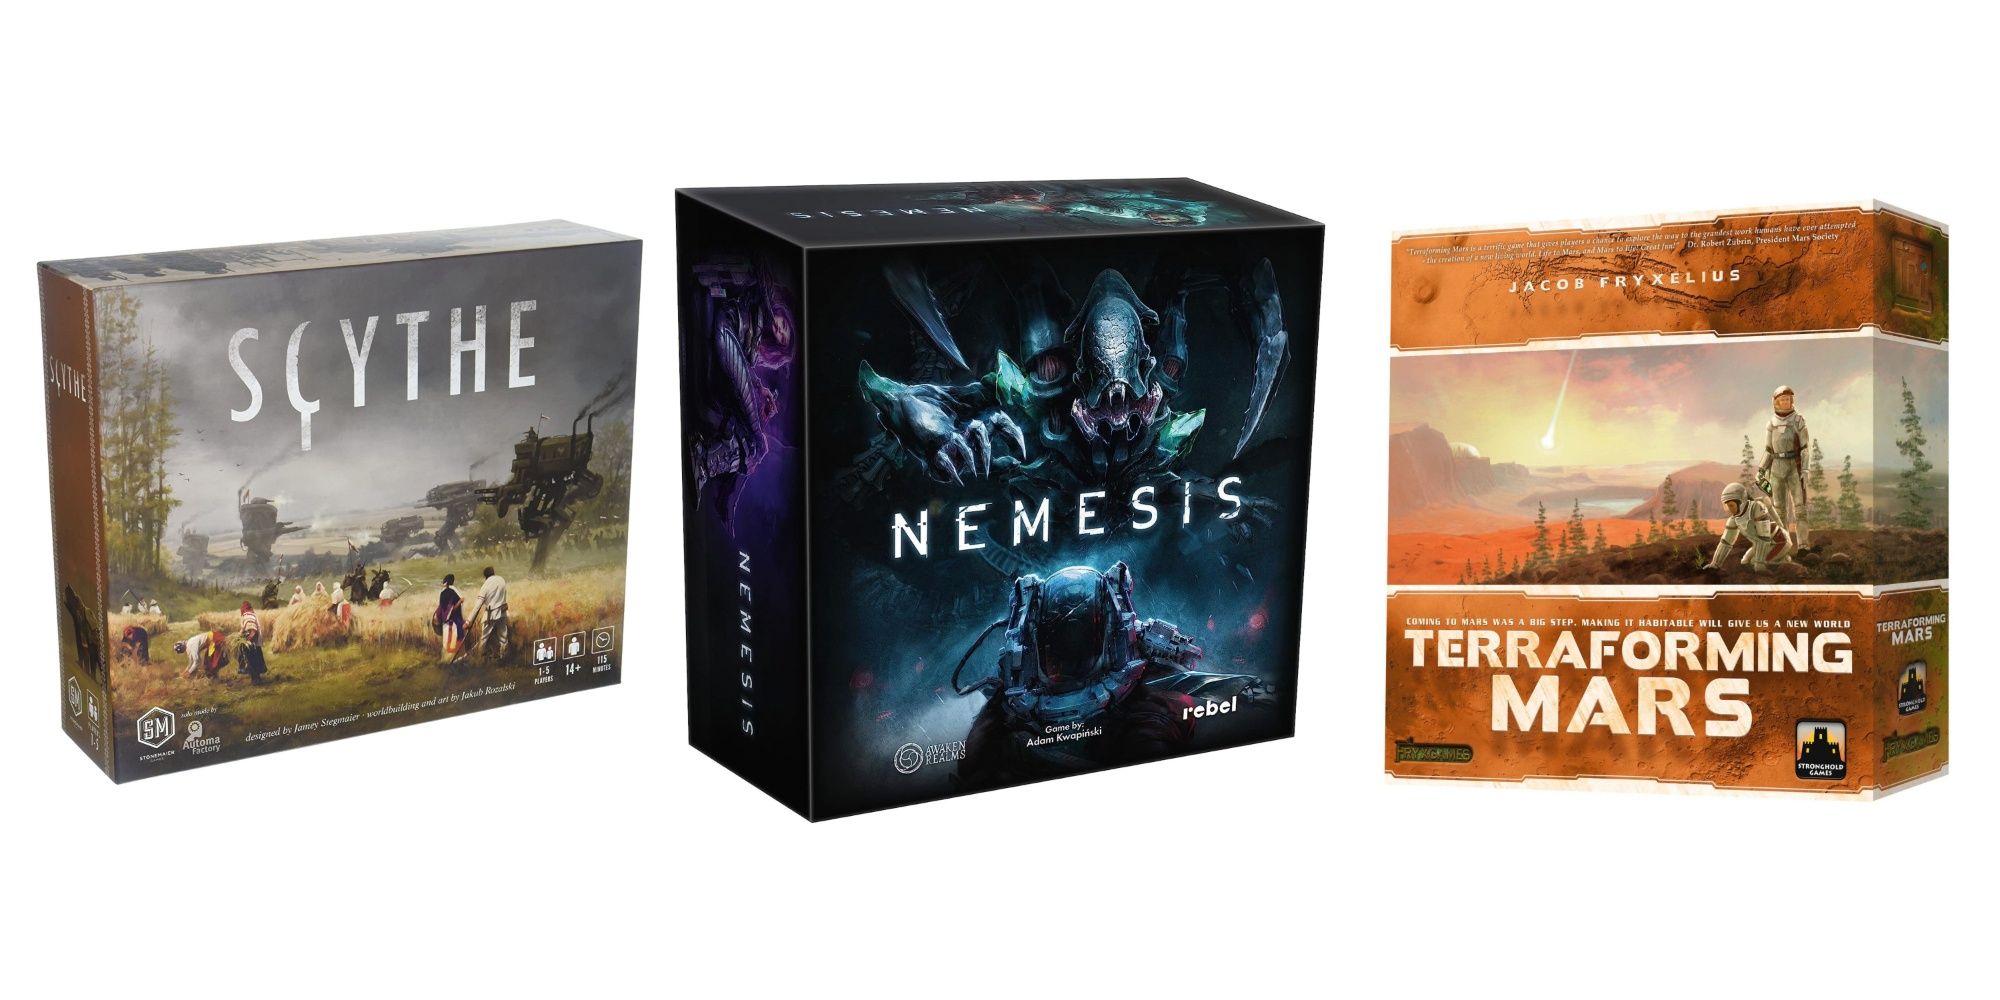 Single player board games featuring Scythe, Nemesis, and Terraforming Mars